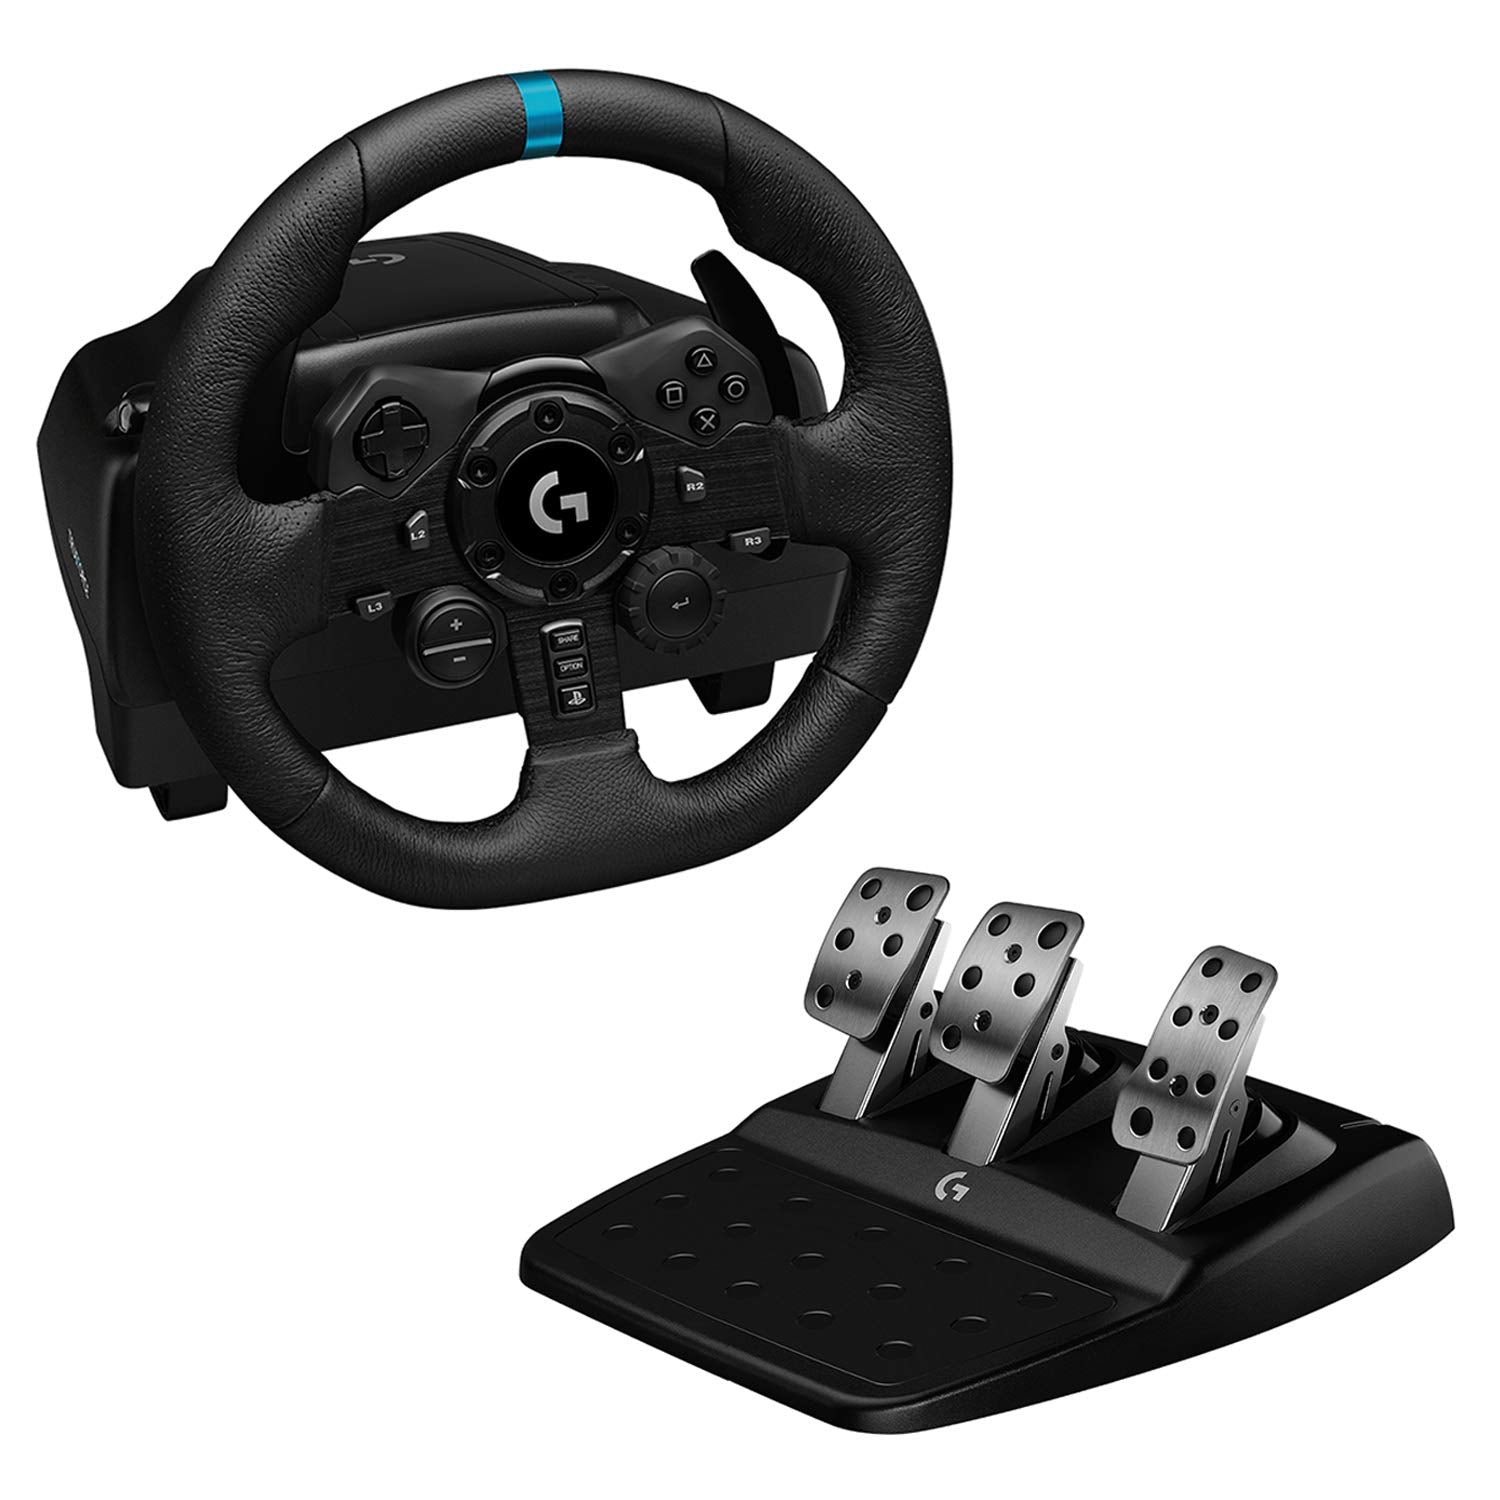 Logitech G923 Racing Wheel and Pedals for PS5, PS4 and PC - Black (Certified Refurbished)